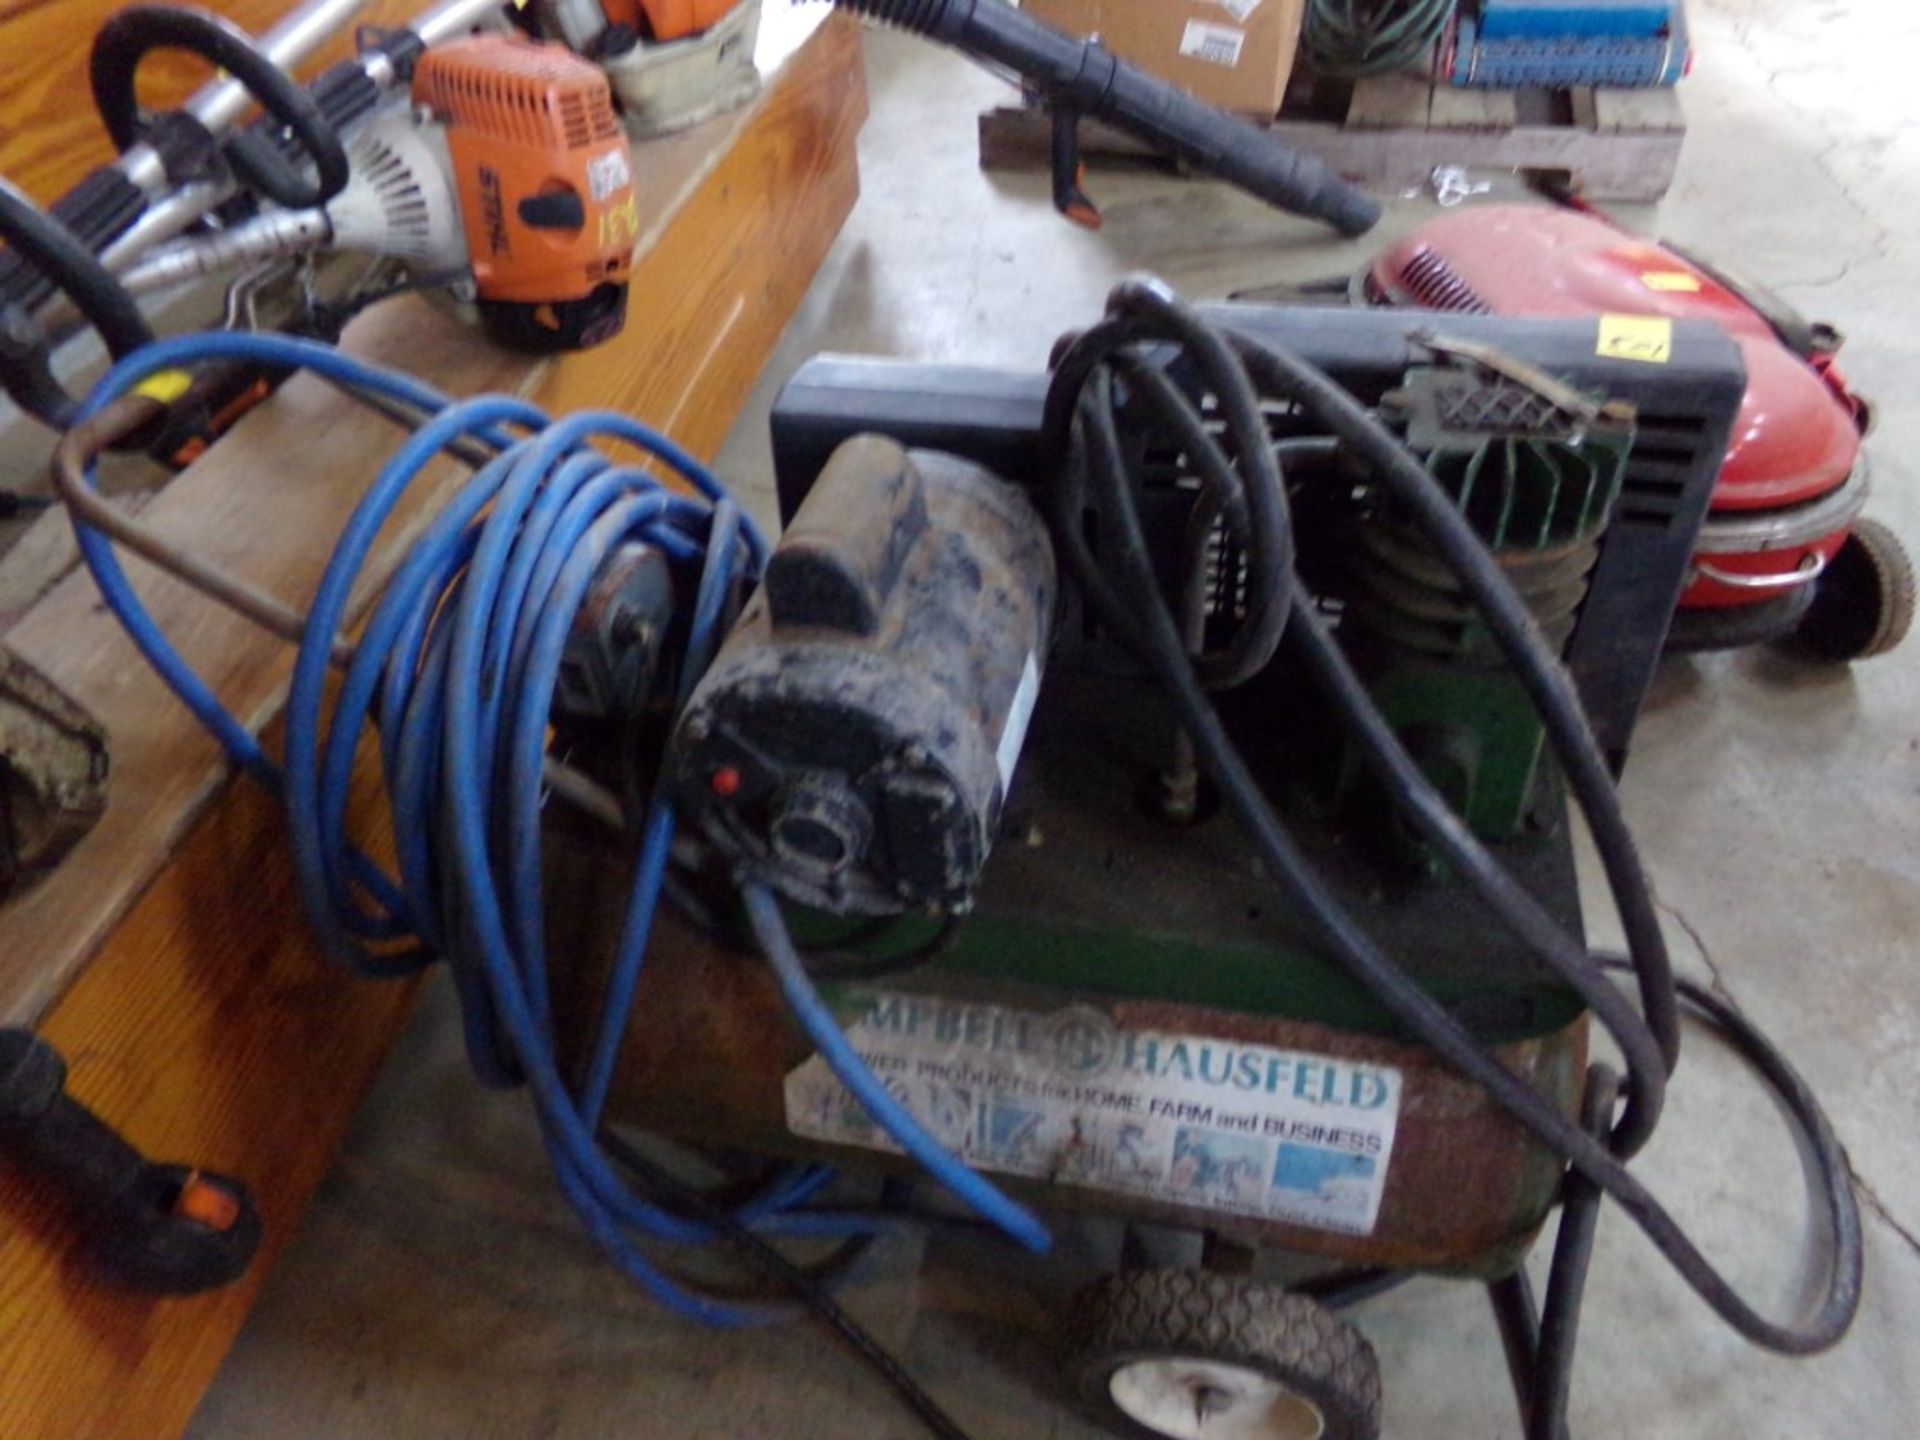 Campbell Hausfeld Horizontal Air Compressor, Needs Work, Condition Unknown - Image 2 of 2